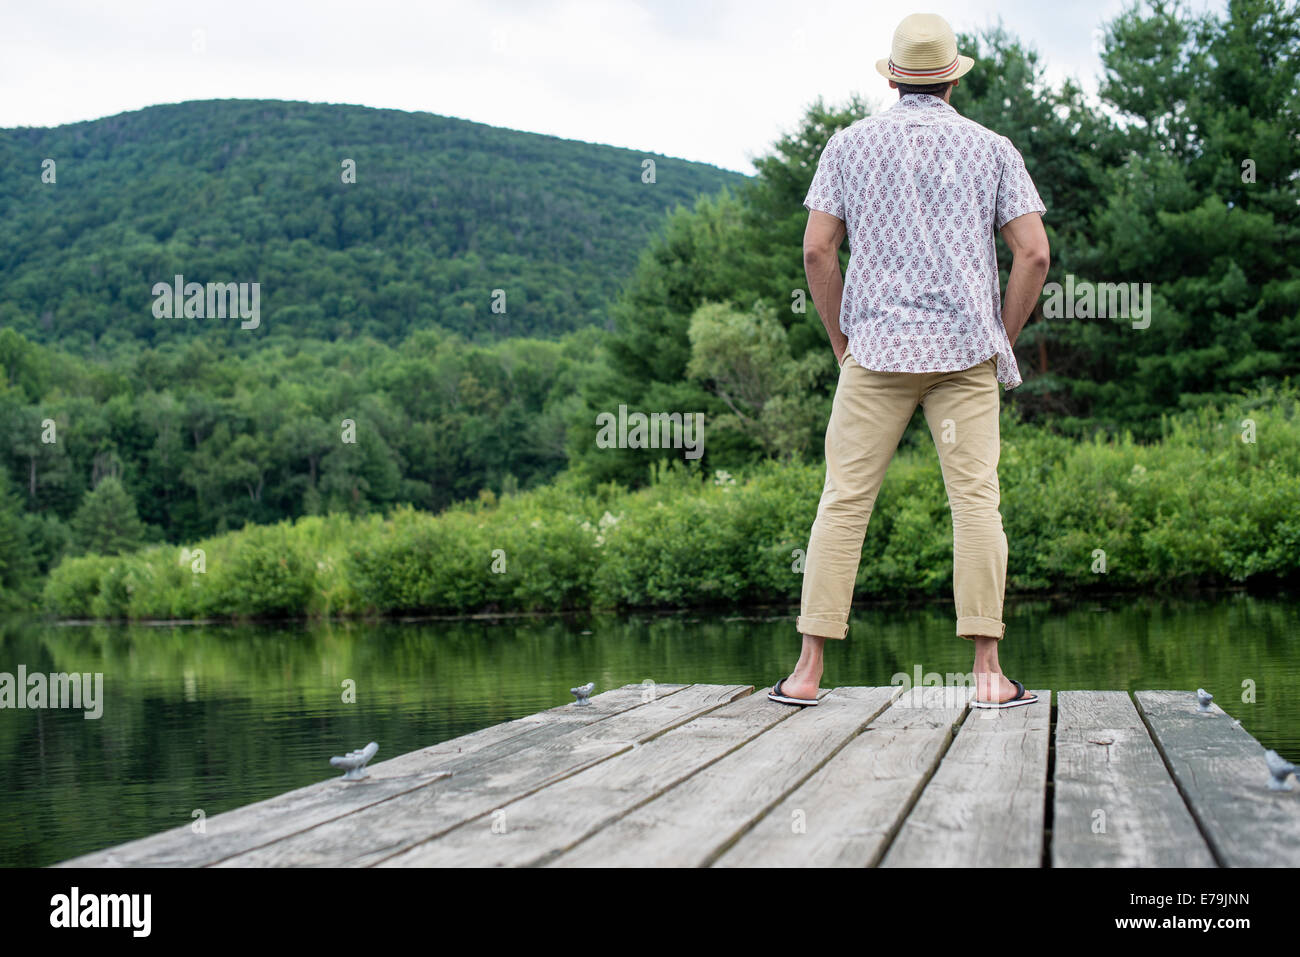 A man standing on a wooden pier overlooking a calm lake. Stock Photo